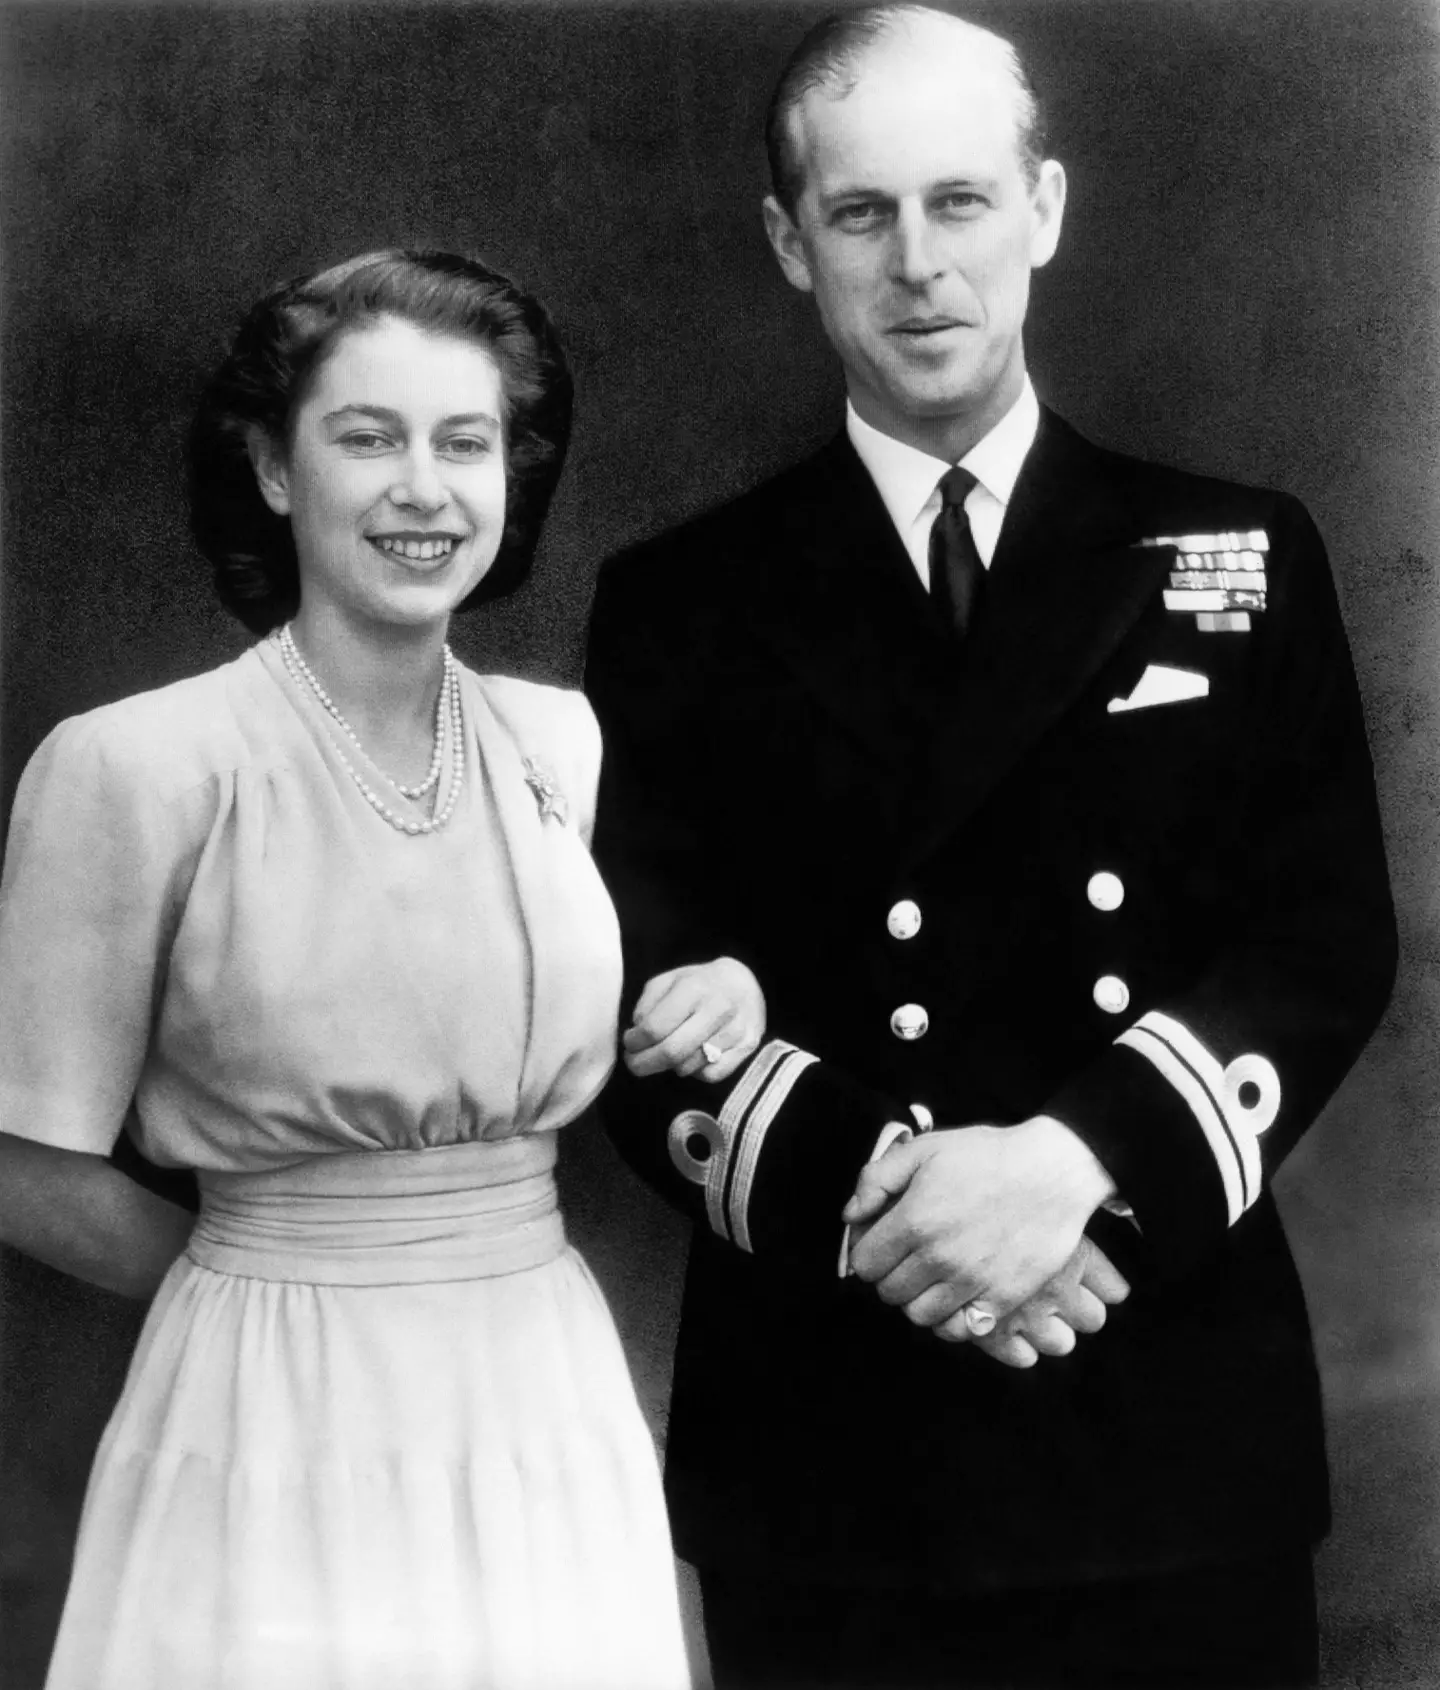 The official engagement photo showing the future Queen in 1947.